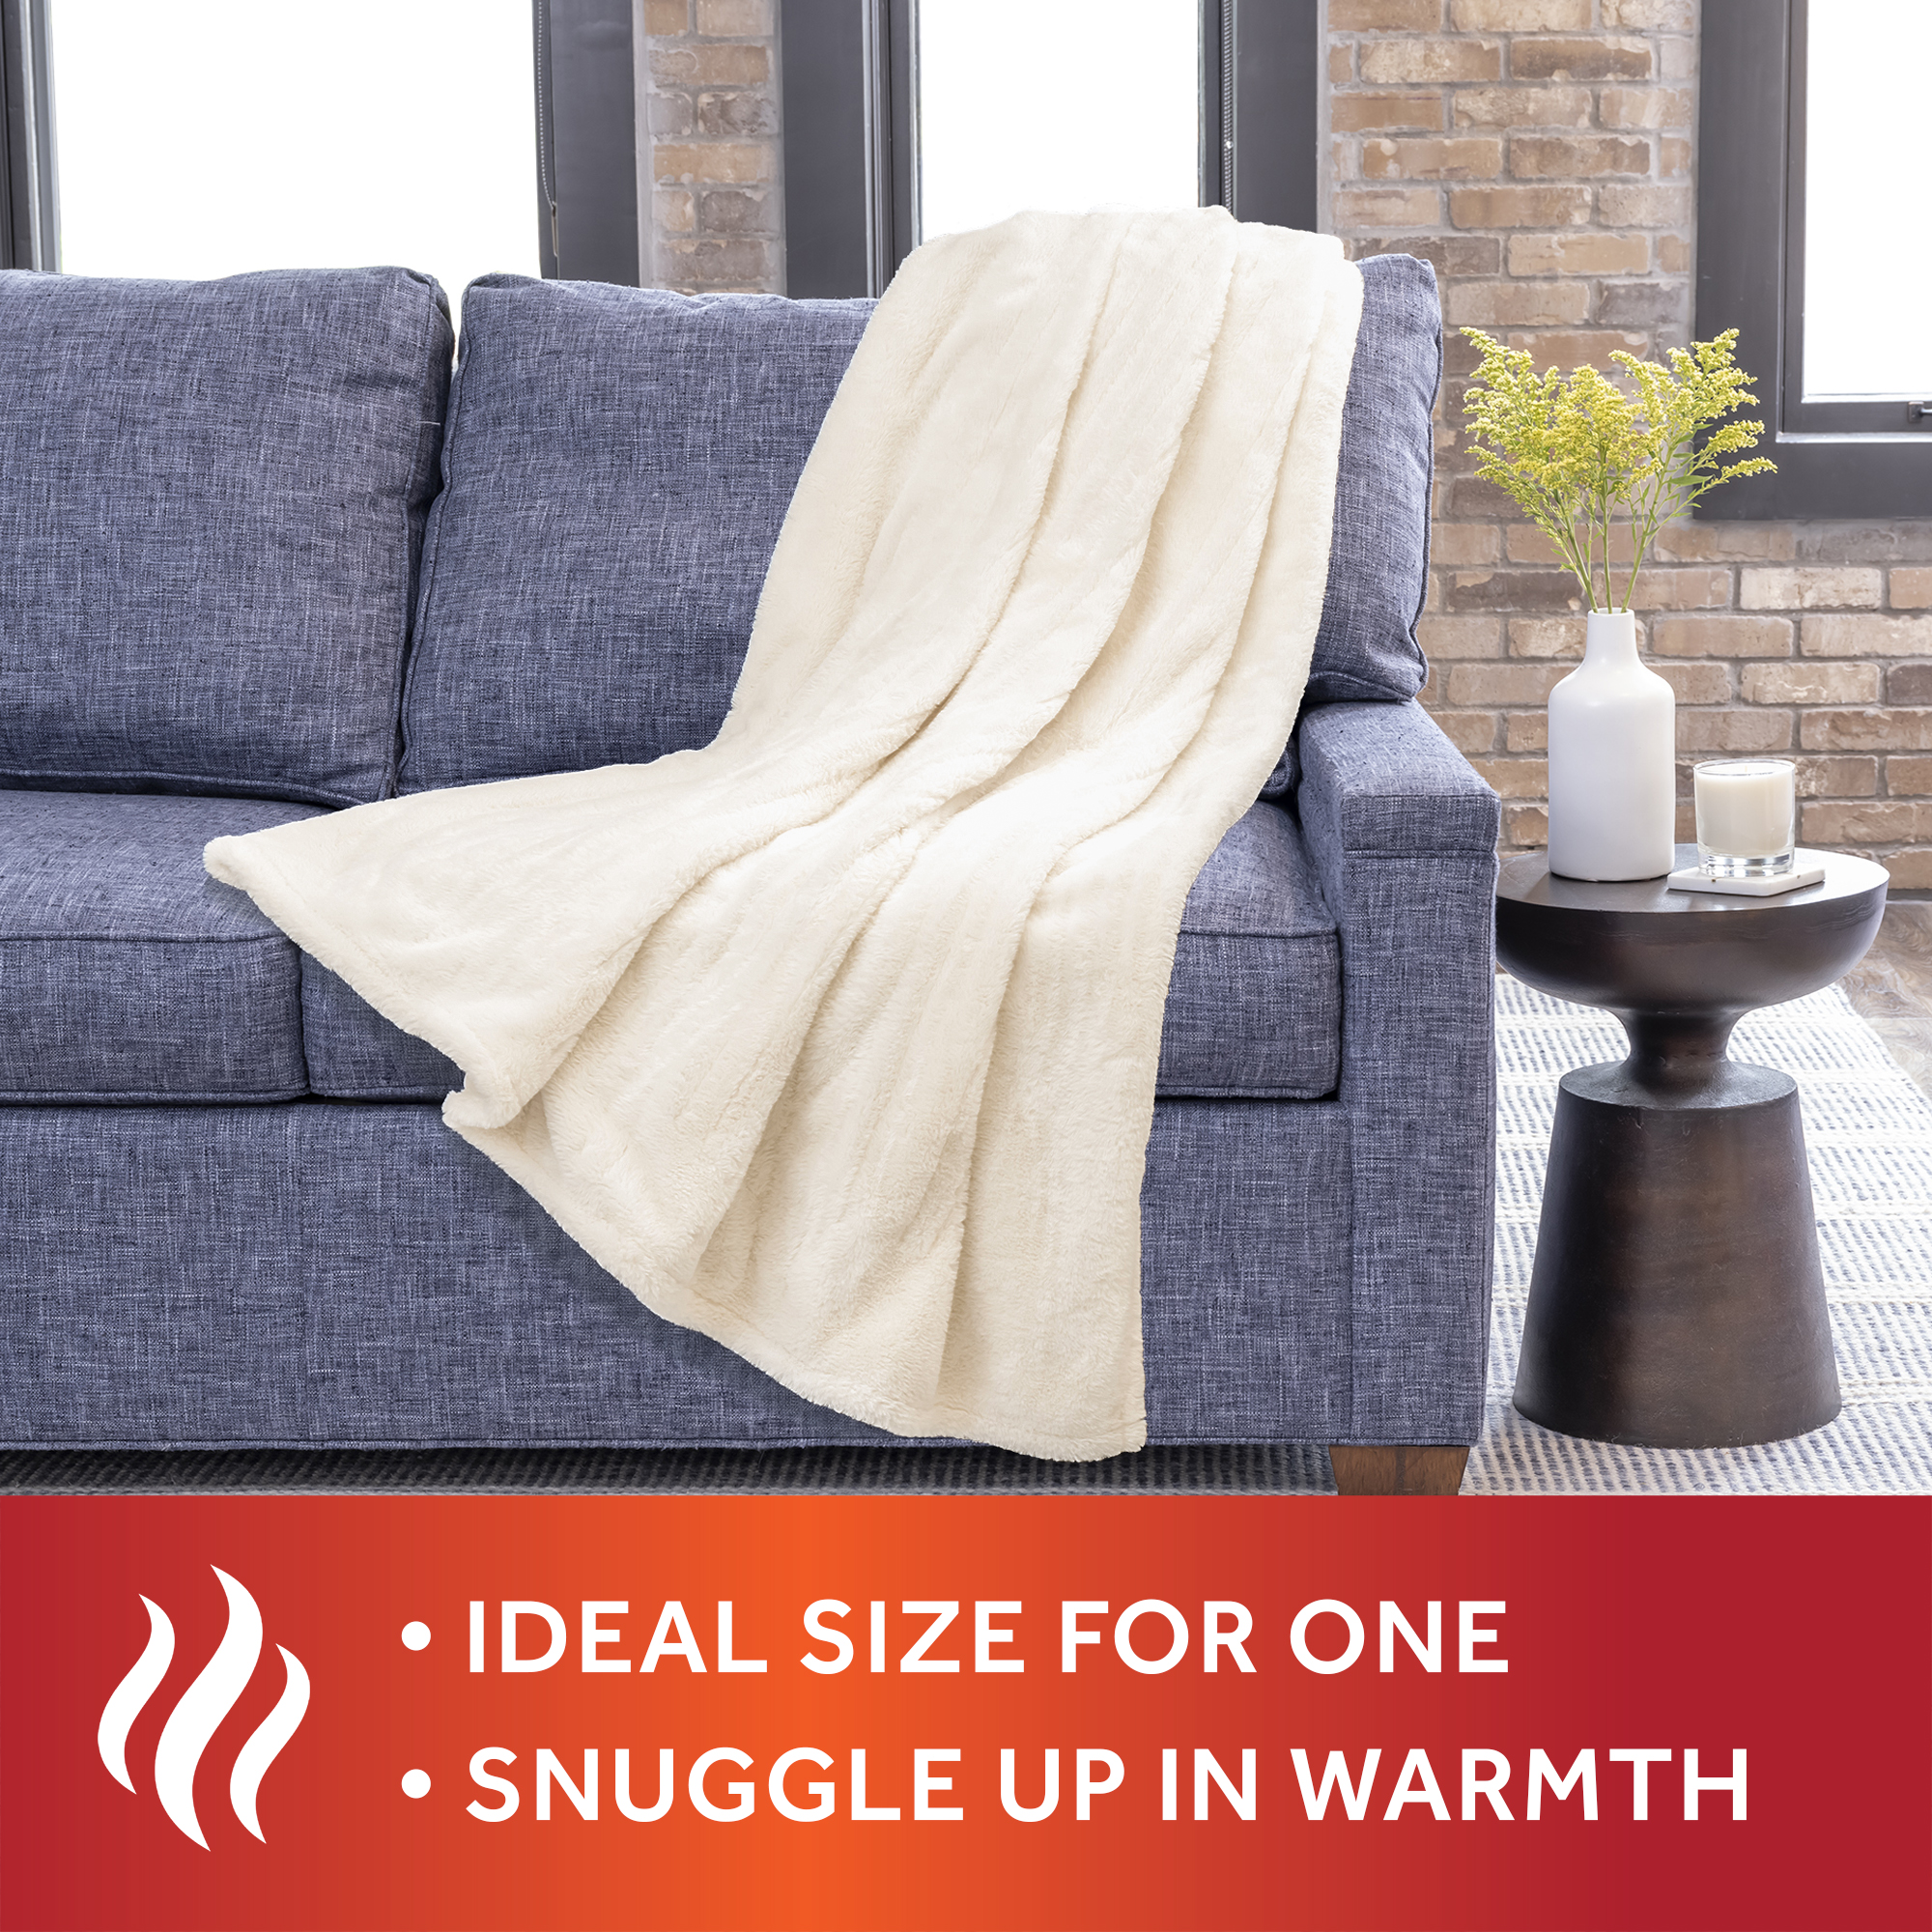 Sunbeam White Faux Fur Heated Electric Throw - image 5 of 8